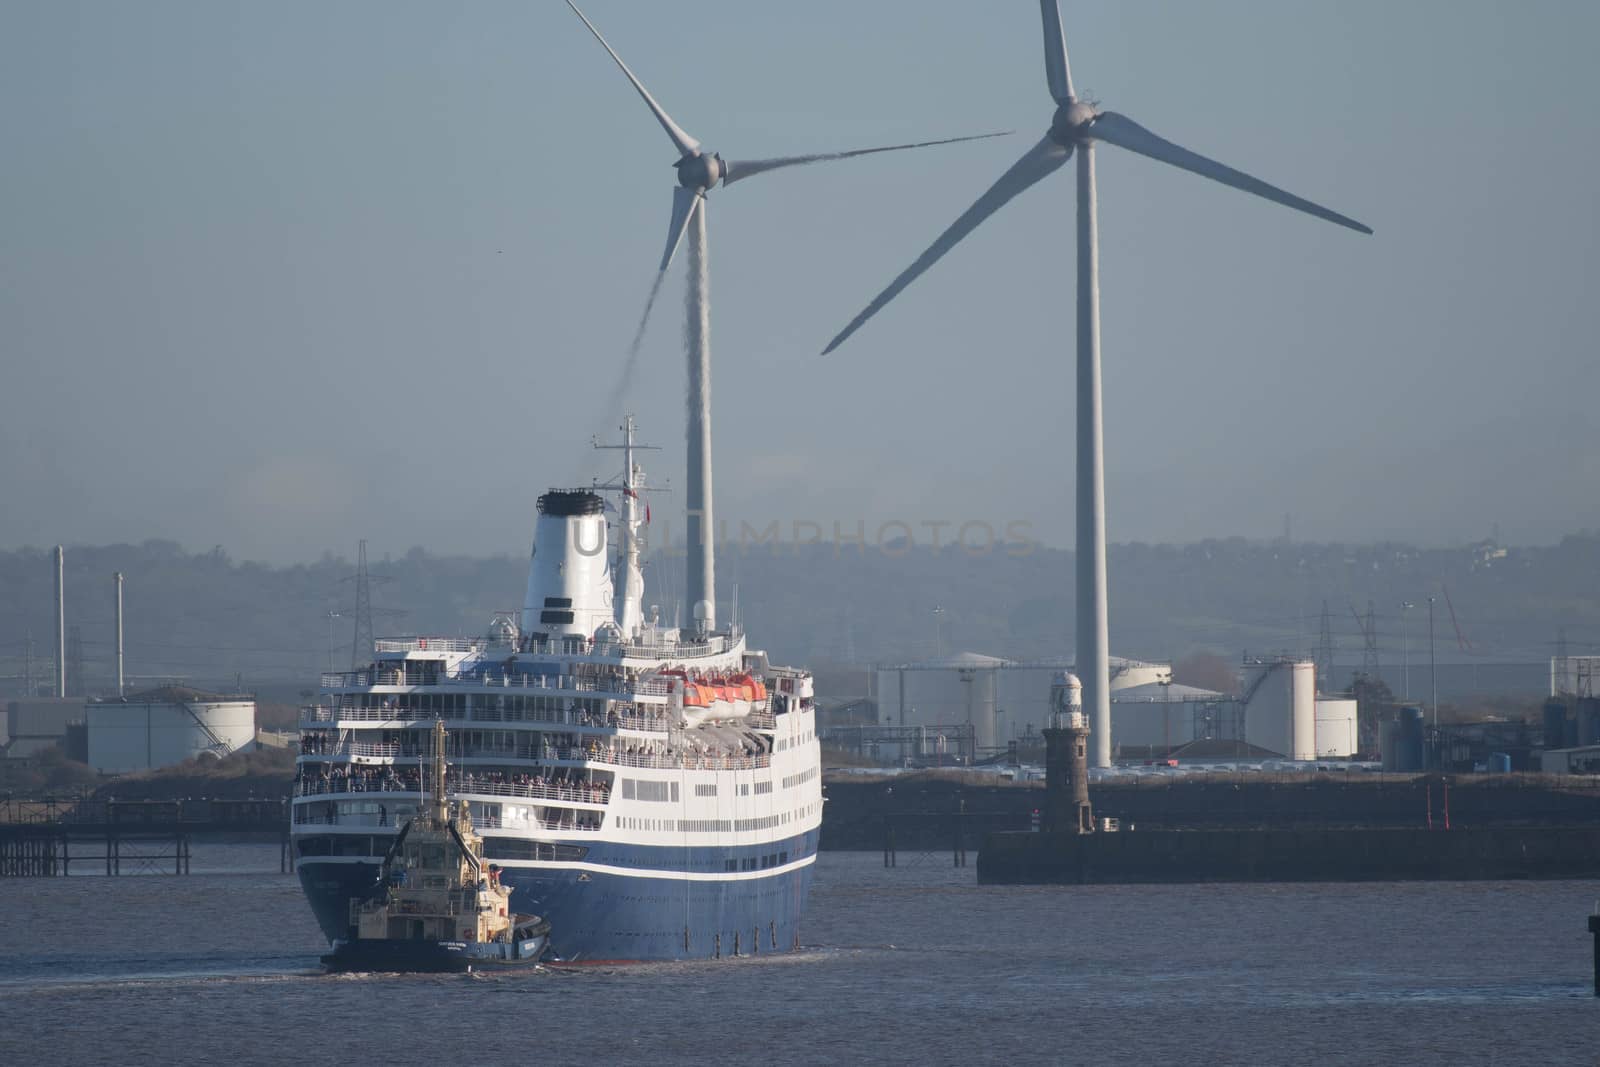 A passenger cruise liner passes two electricity generating wind turbines